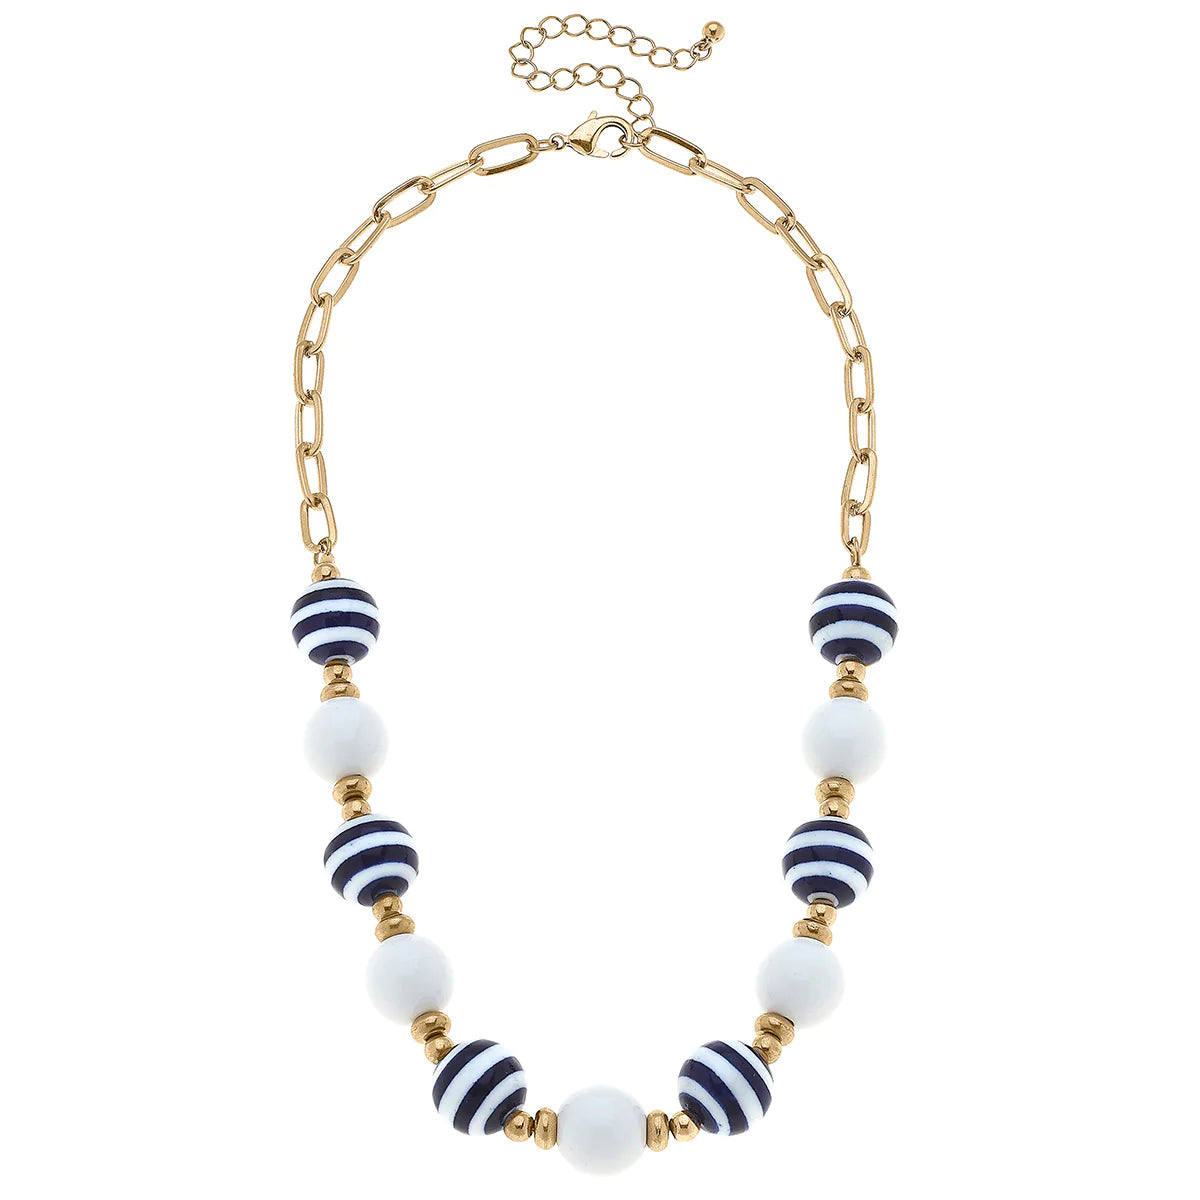 Jade Nautical Ball Bead Chain Link Necklace in Navy & White